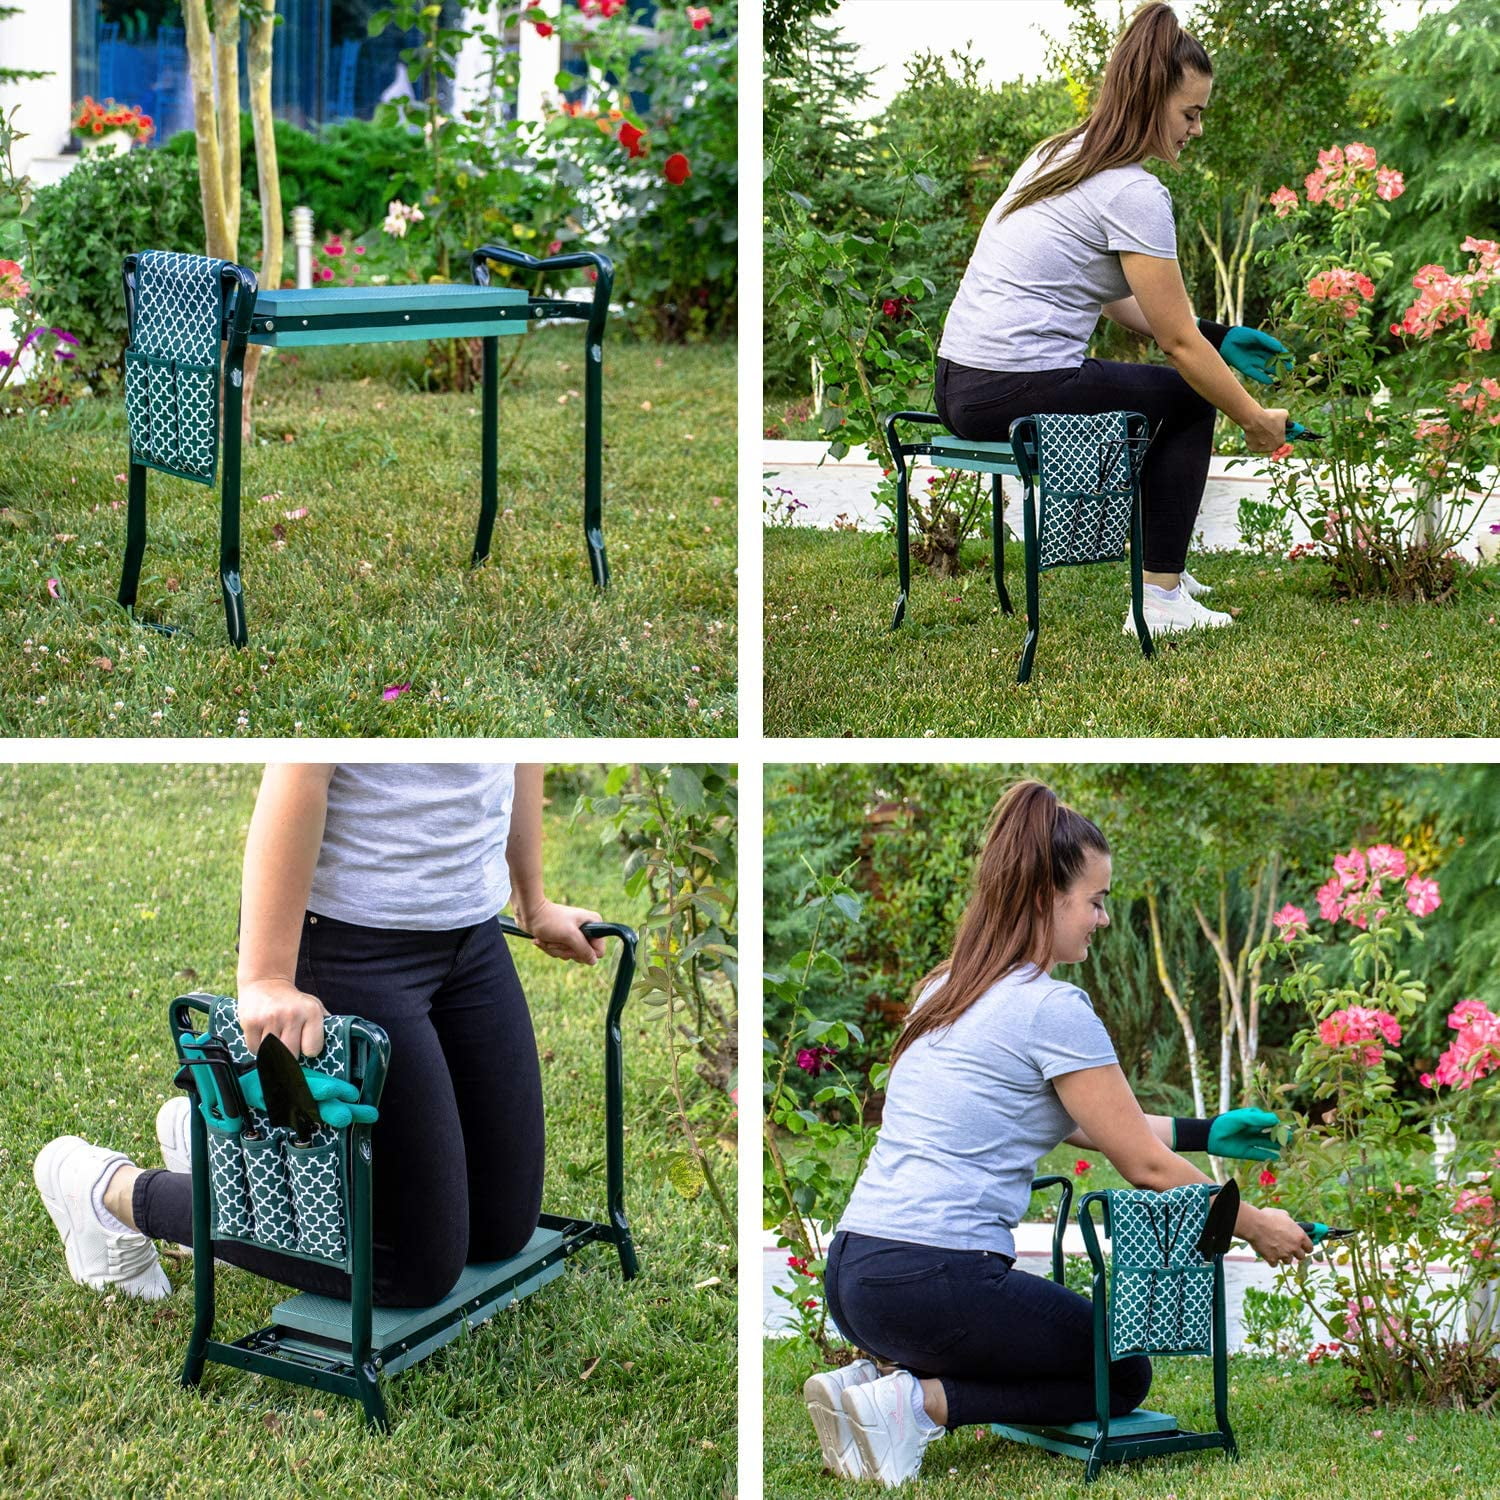 Cesun Garden Kneeler and Seat with Thick Kneeling Pad and Tool Bag Foldable Garden Stool Sturdy Garden Accessories Grass Green